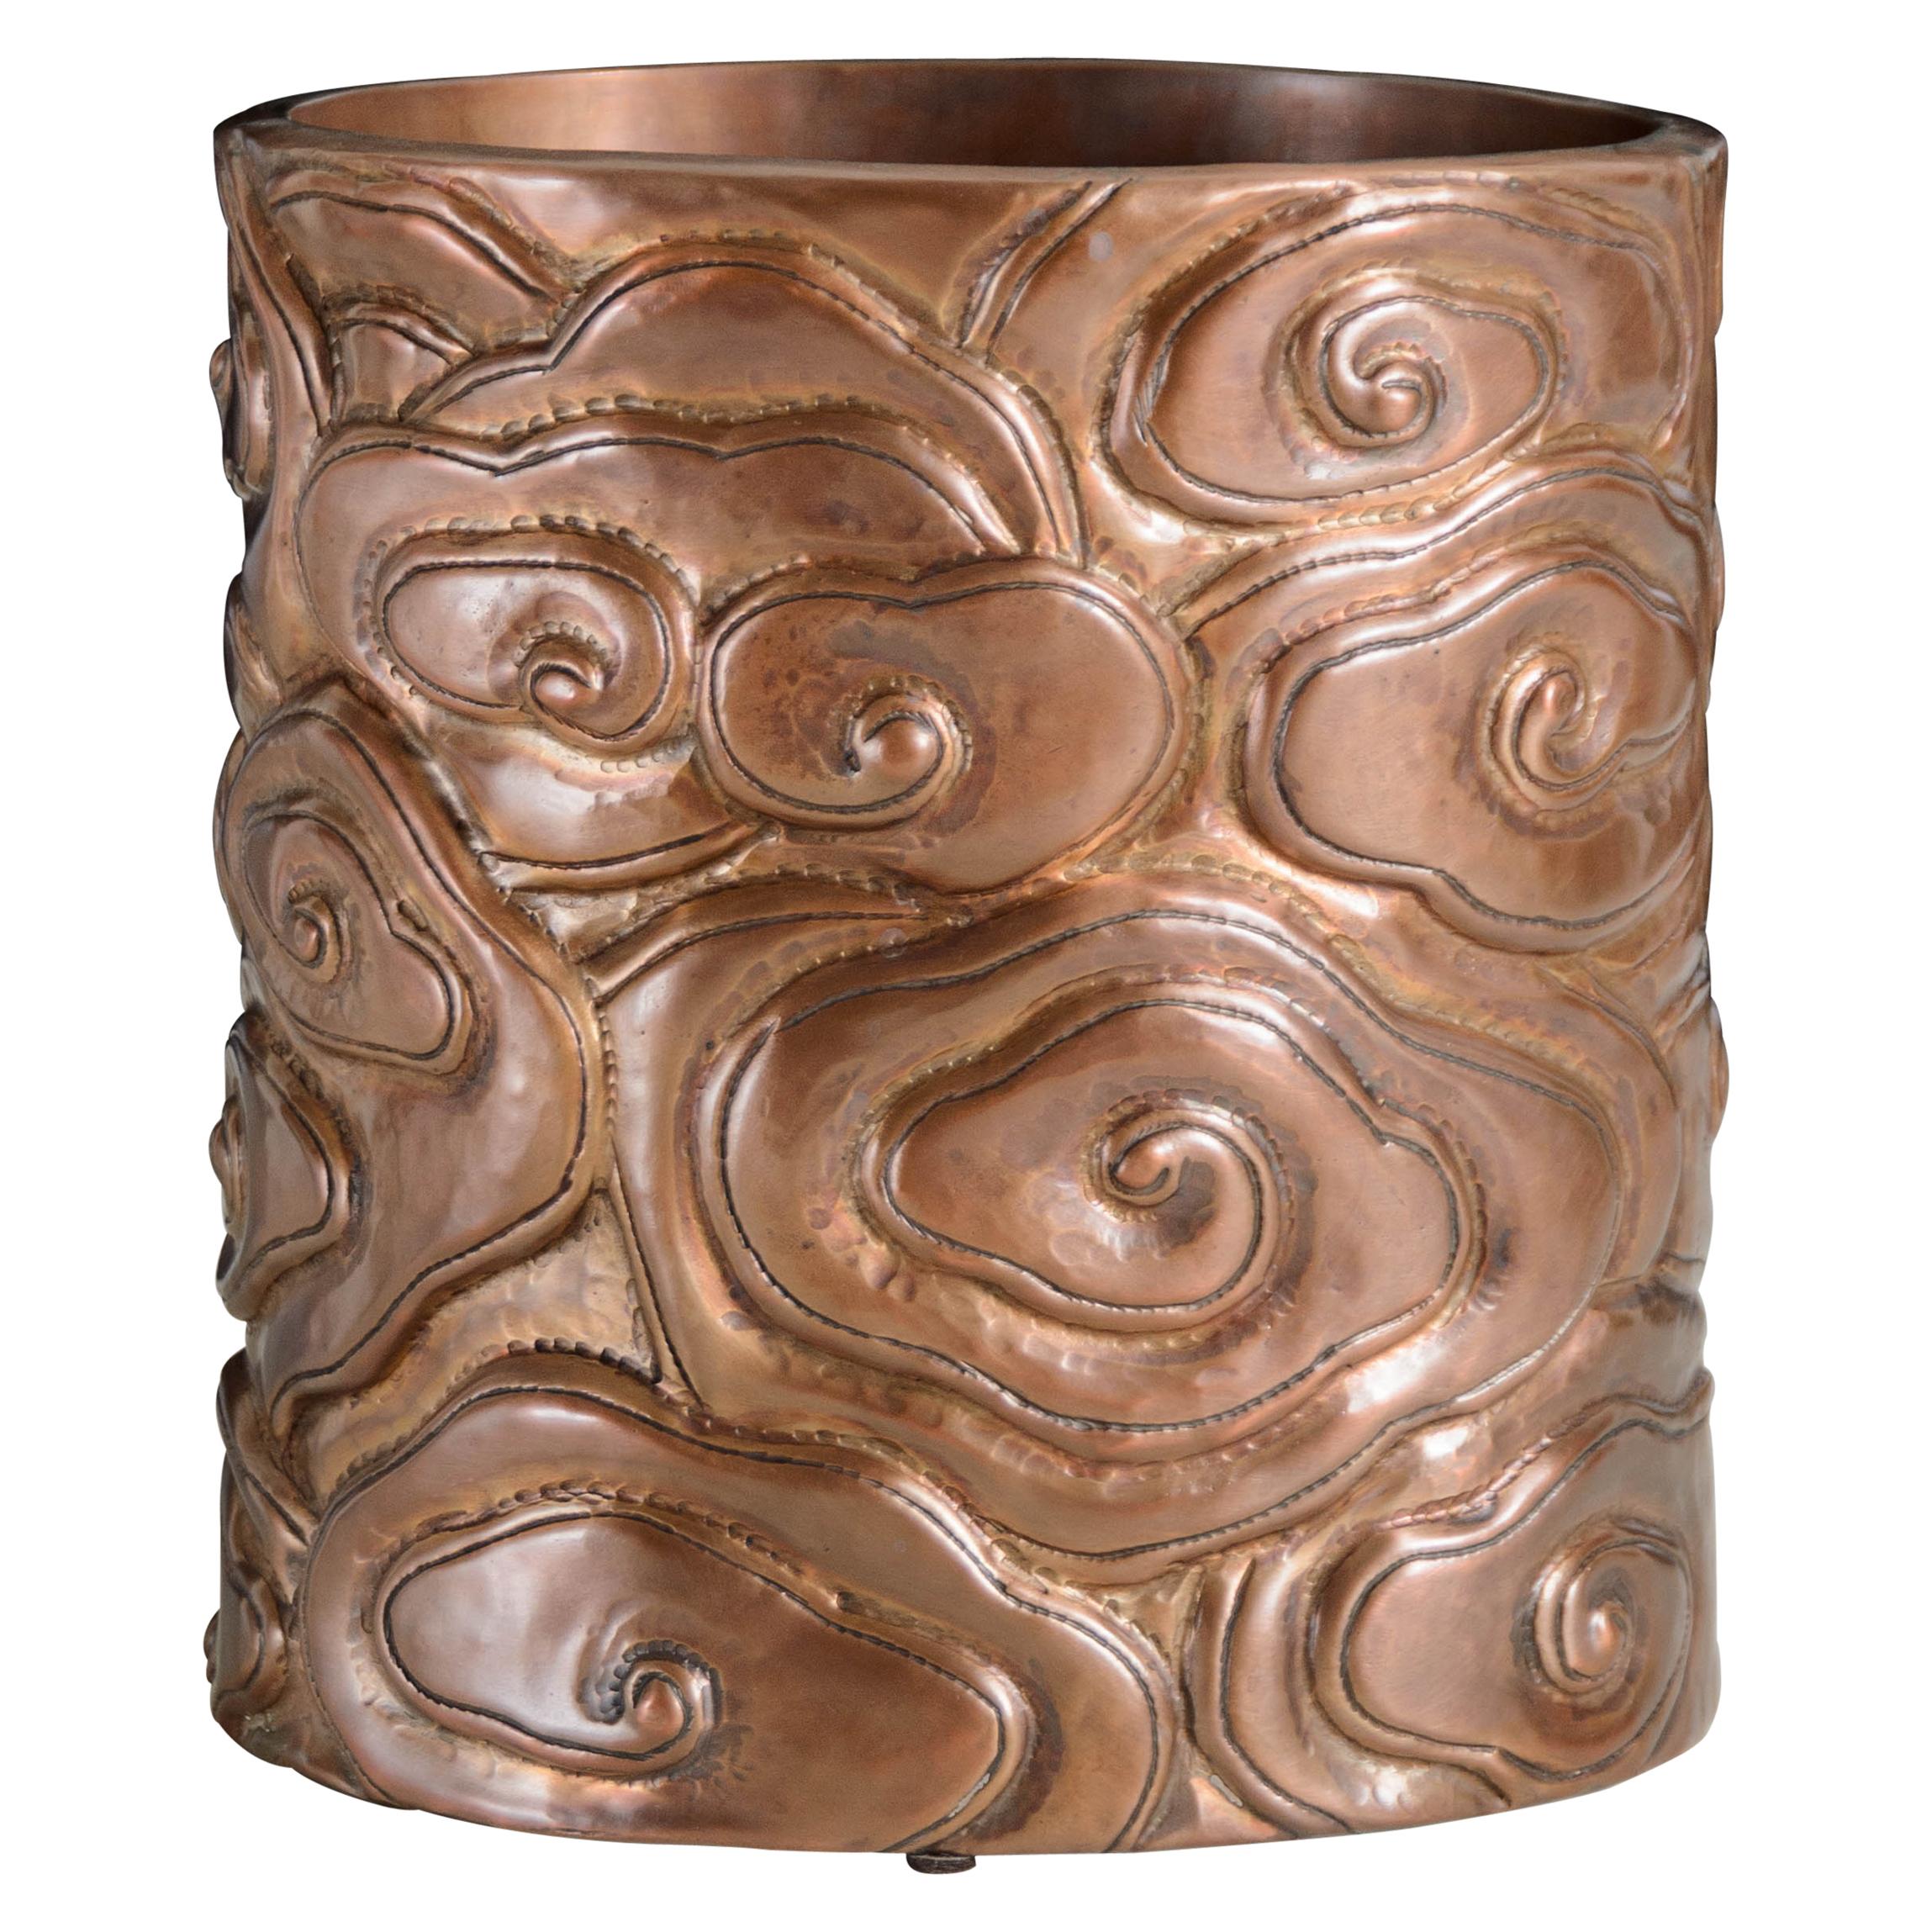 Contemporary Cloud Design Brushpot in Antique Copper by Robert Kuo